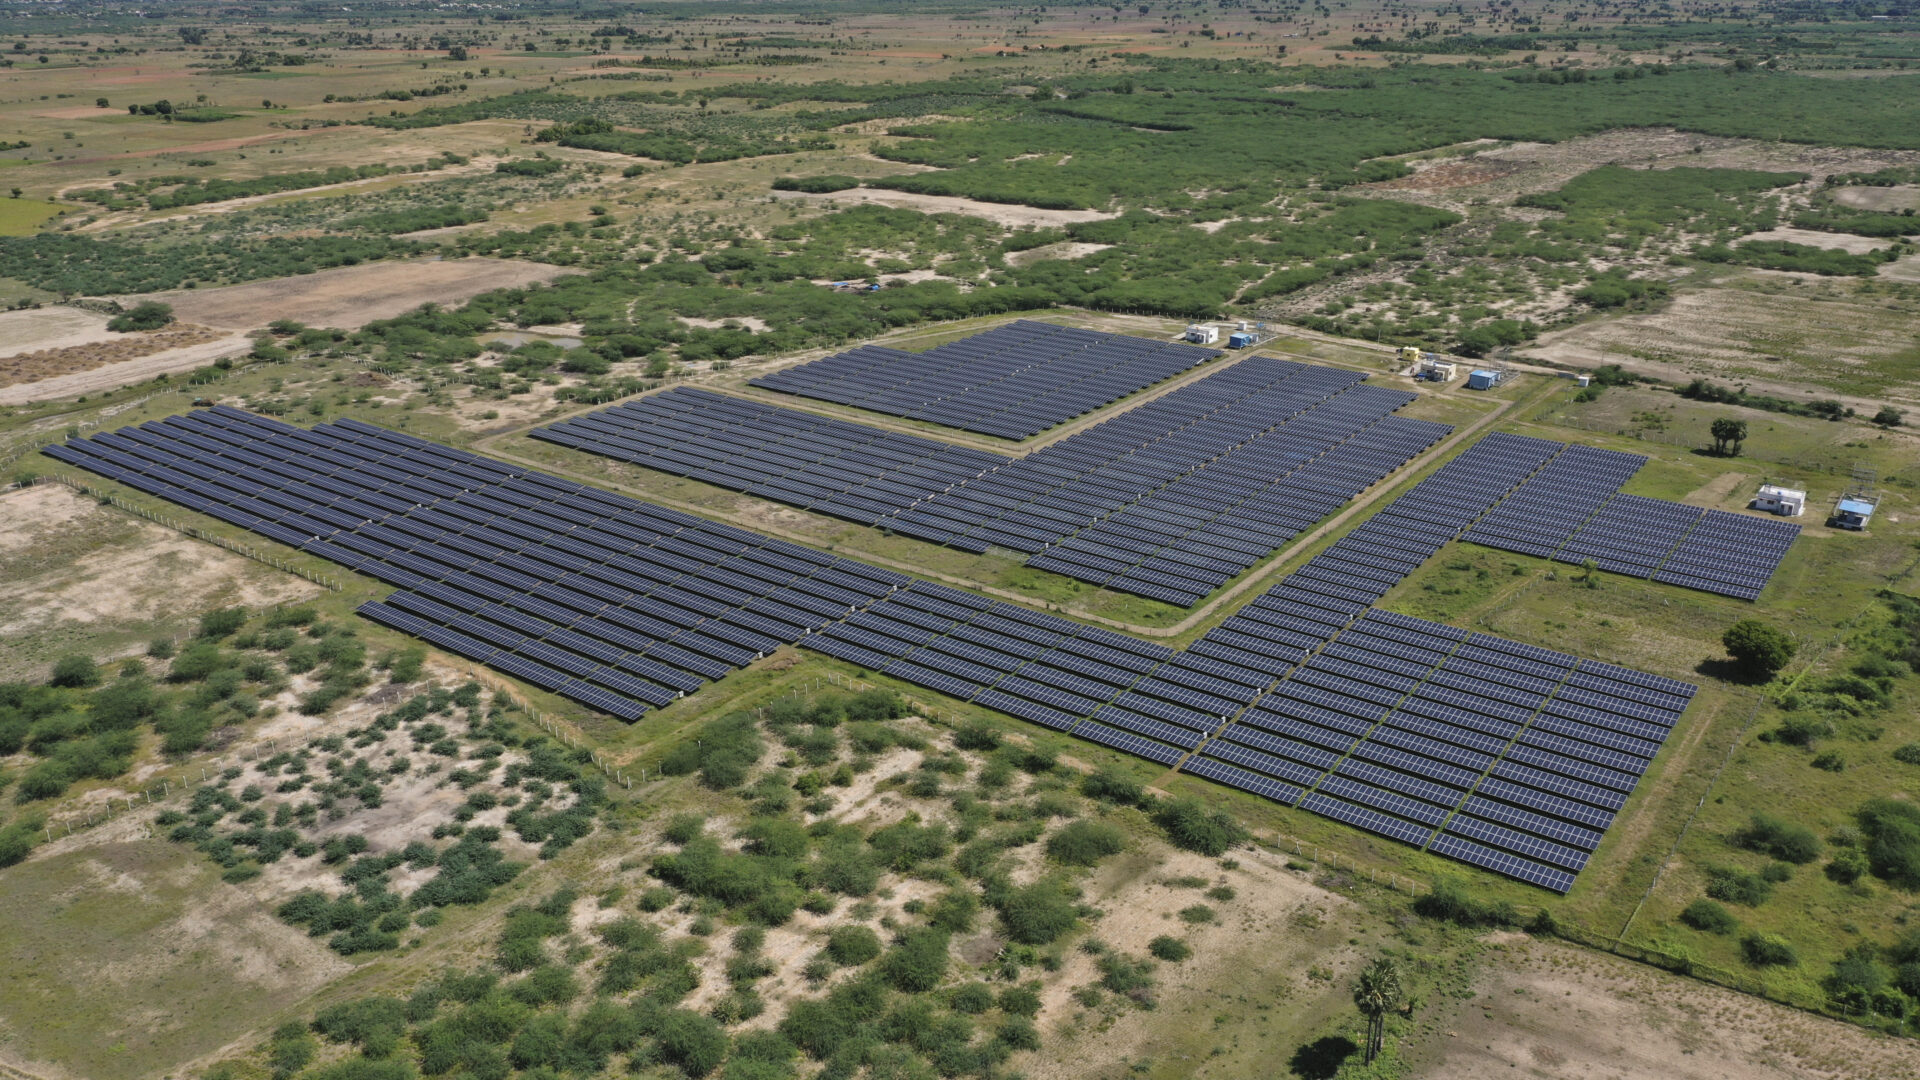 Drone image of solar panels installed at AEDOL industry site.